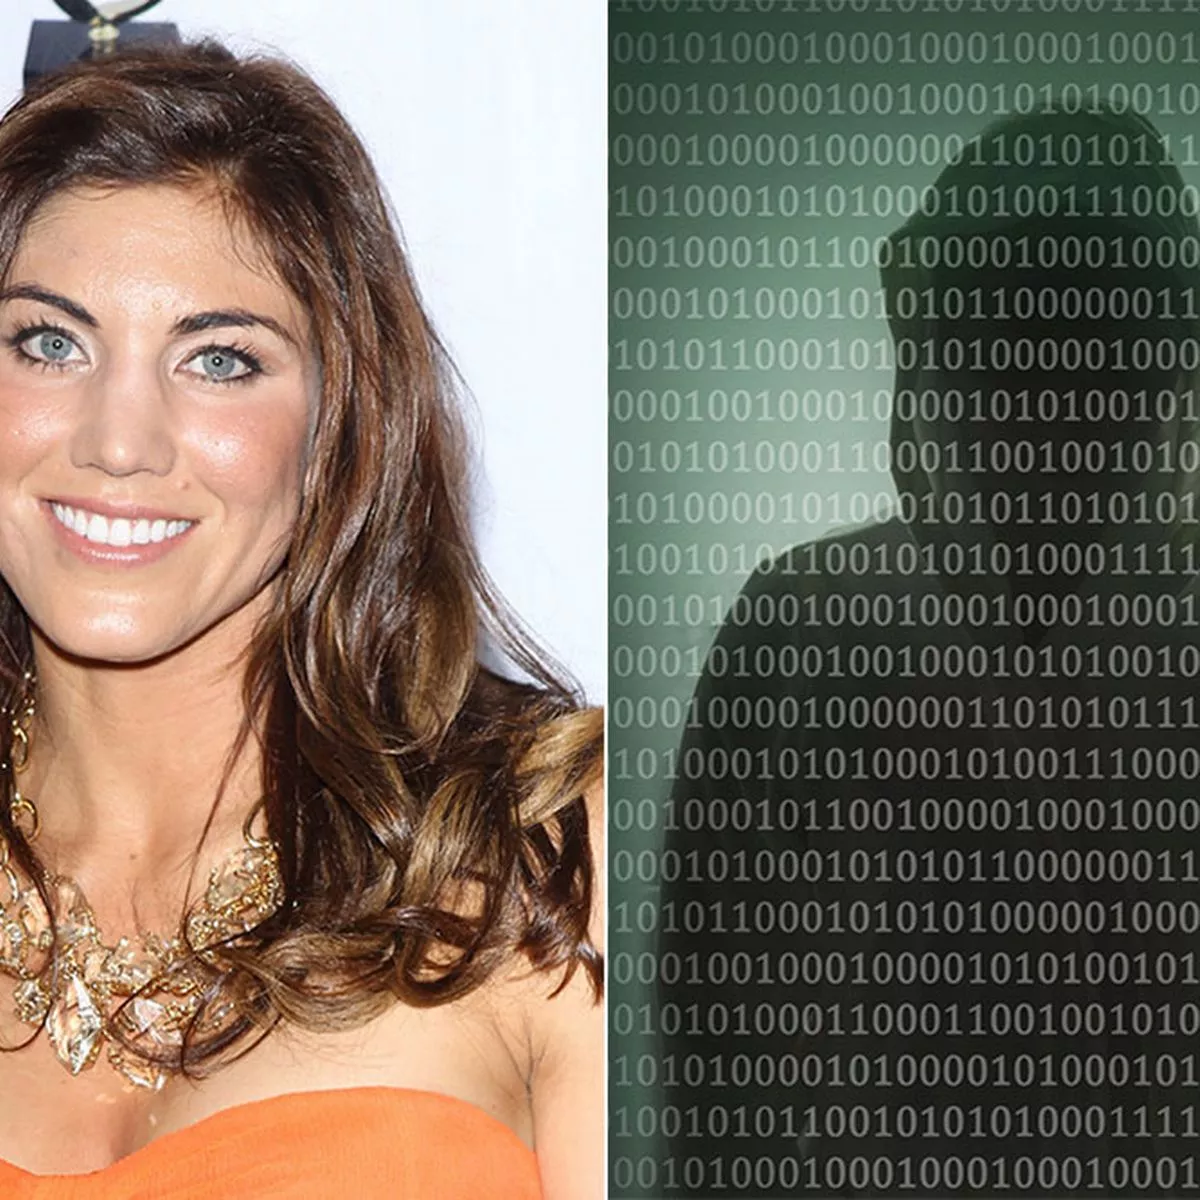 brandy towne recommends Hope Solo Leaked Pics